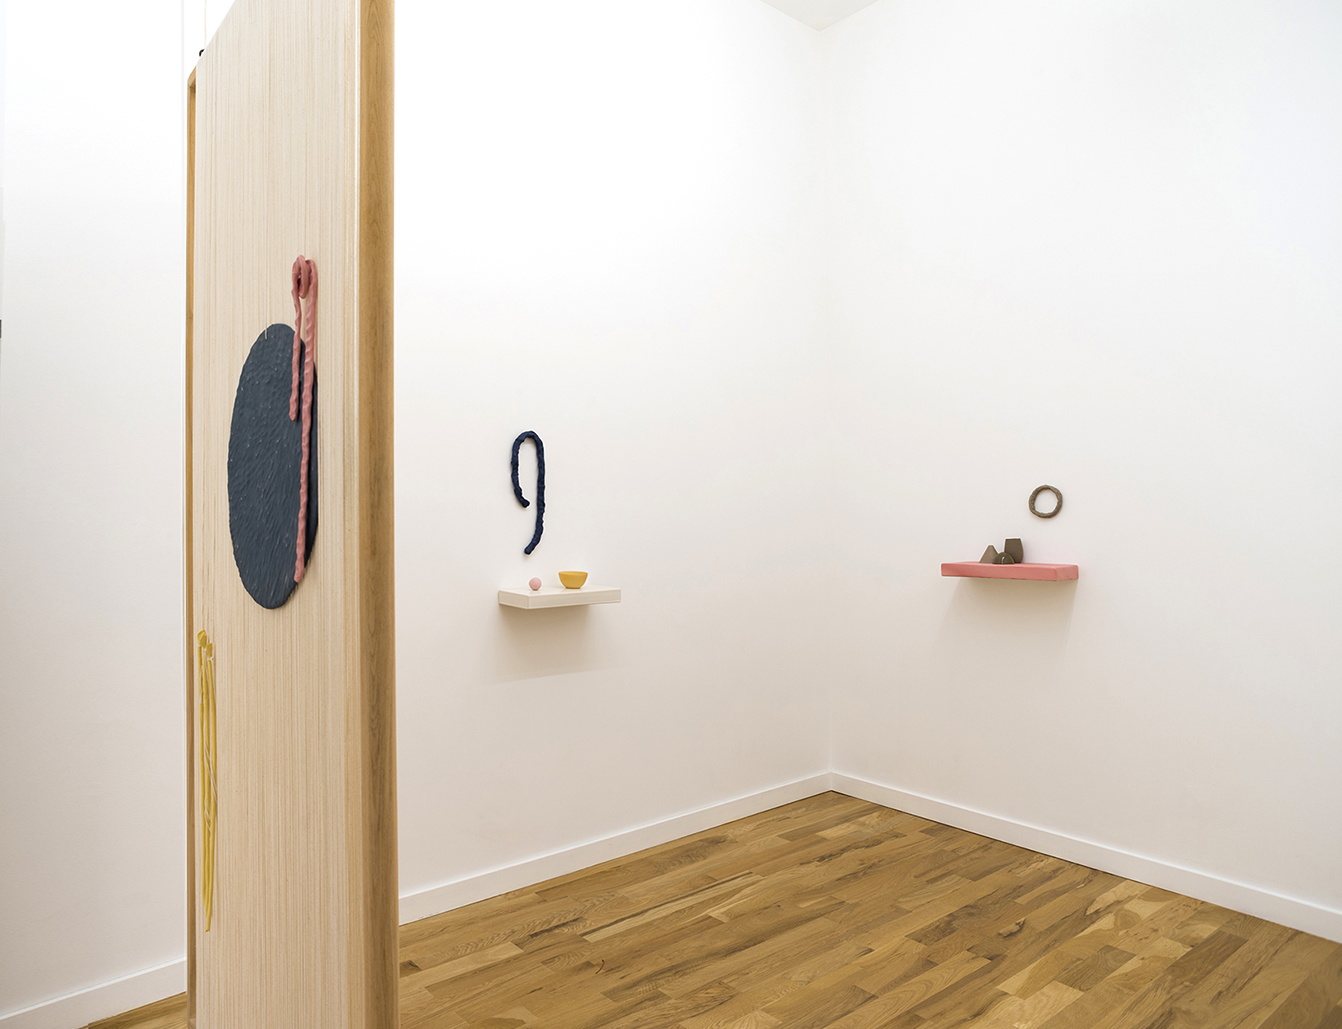 Installation view, Bit by Bit Above the Edge of Things